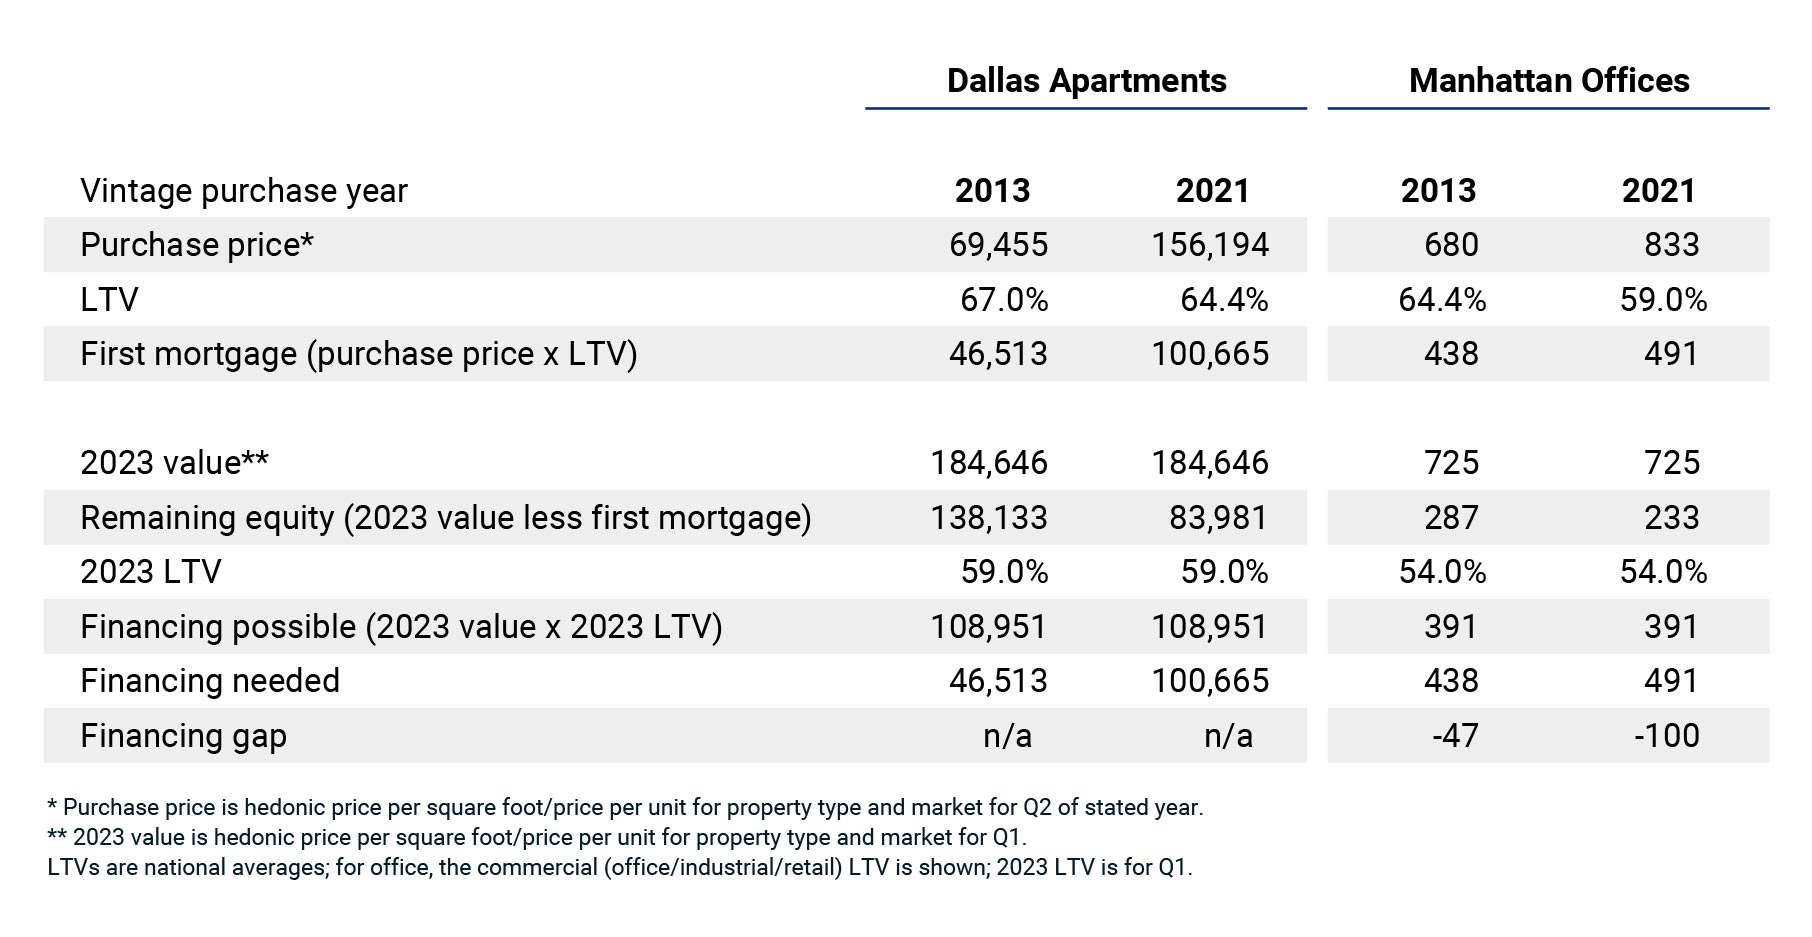 This table shows the cases of average Manhattan office buildings and Dallas apartment buildings, detailing the LTVs, loan sizes and pricing for 2013, 2018 and 2023 which could lead to a financing gap.